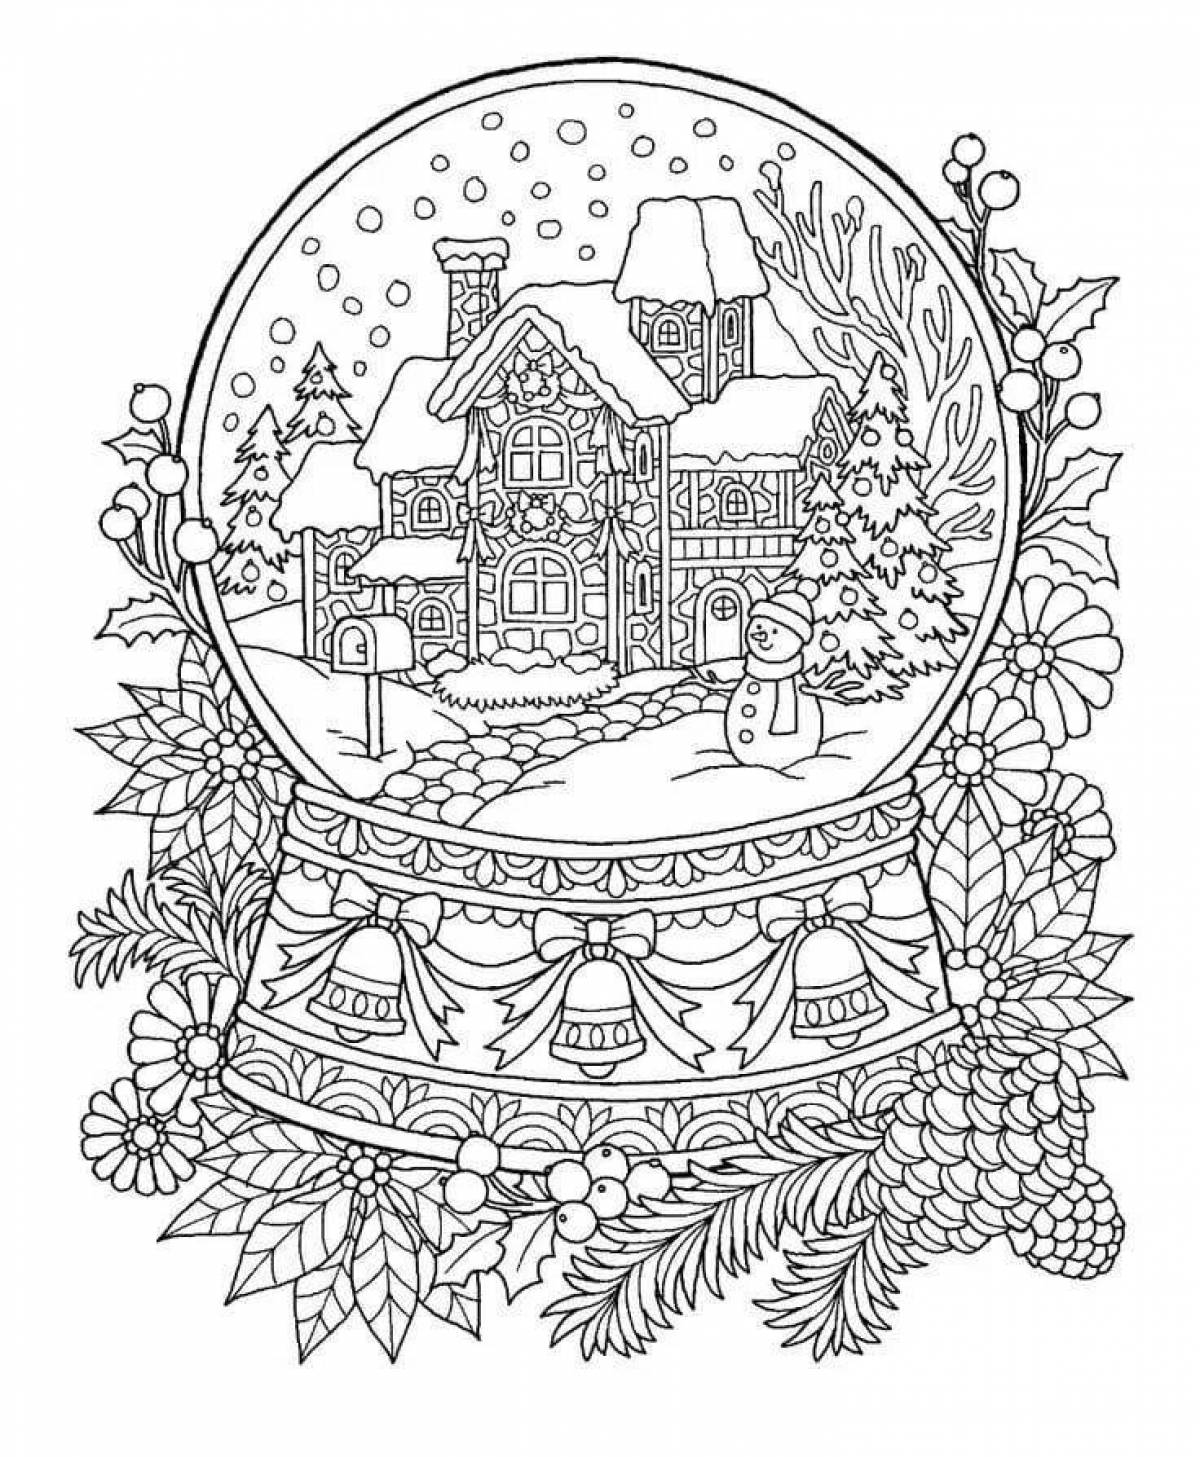 Glorious New Year anti-stress coloring book